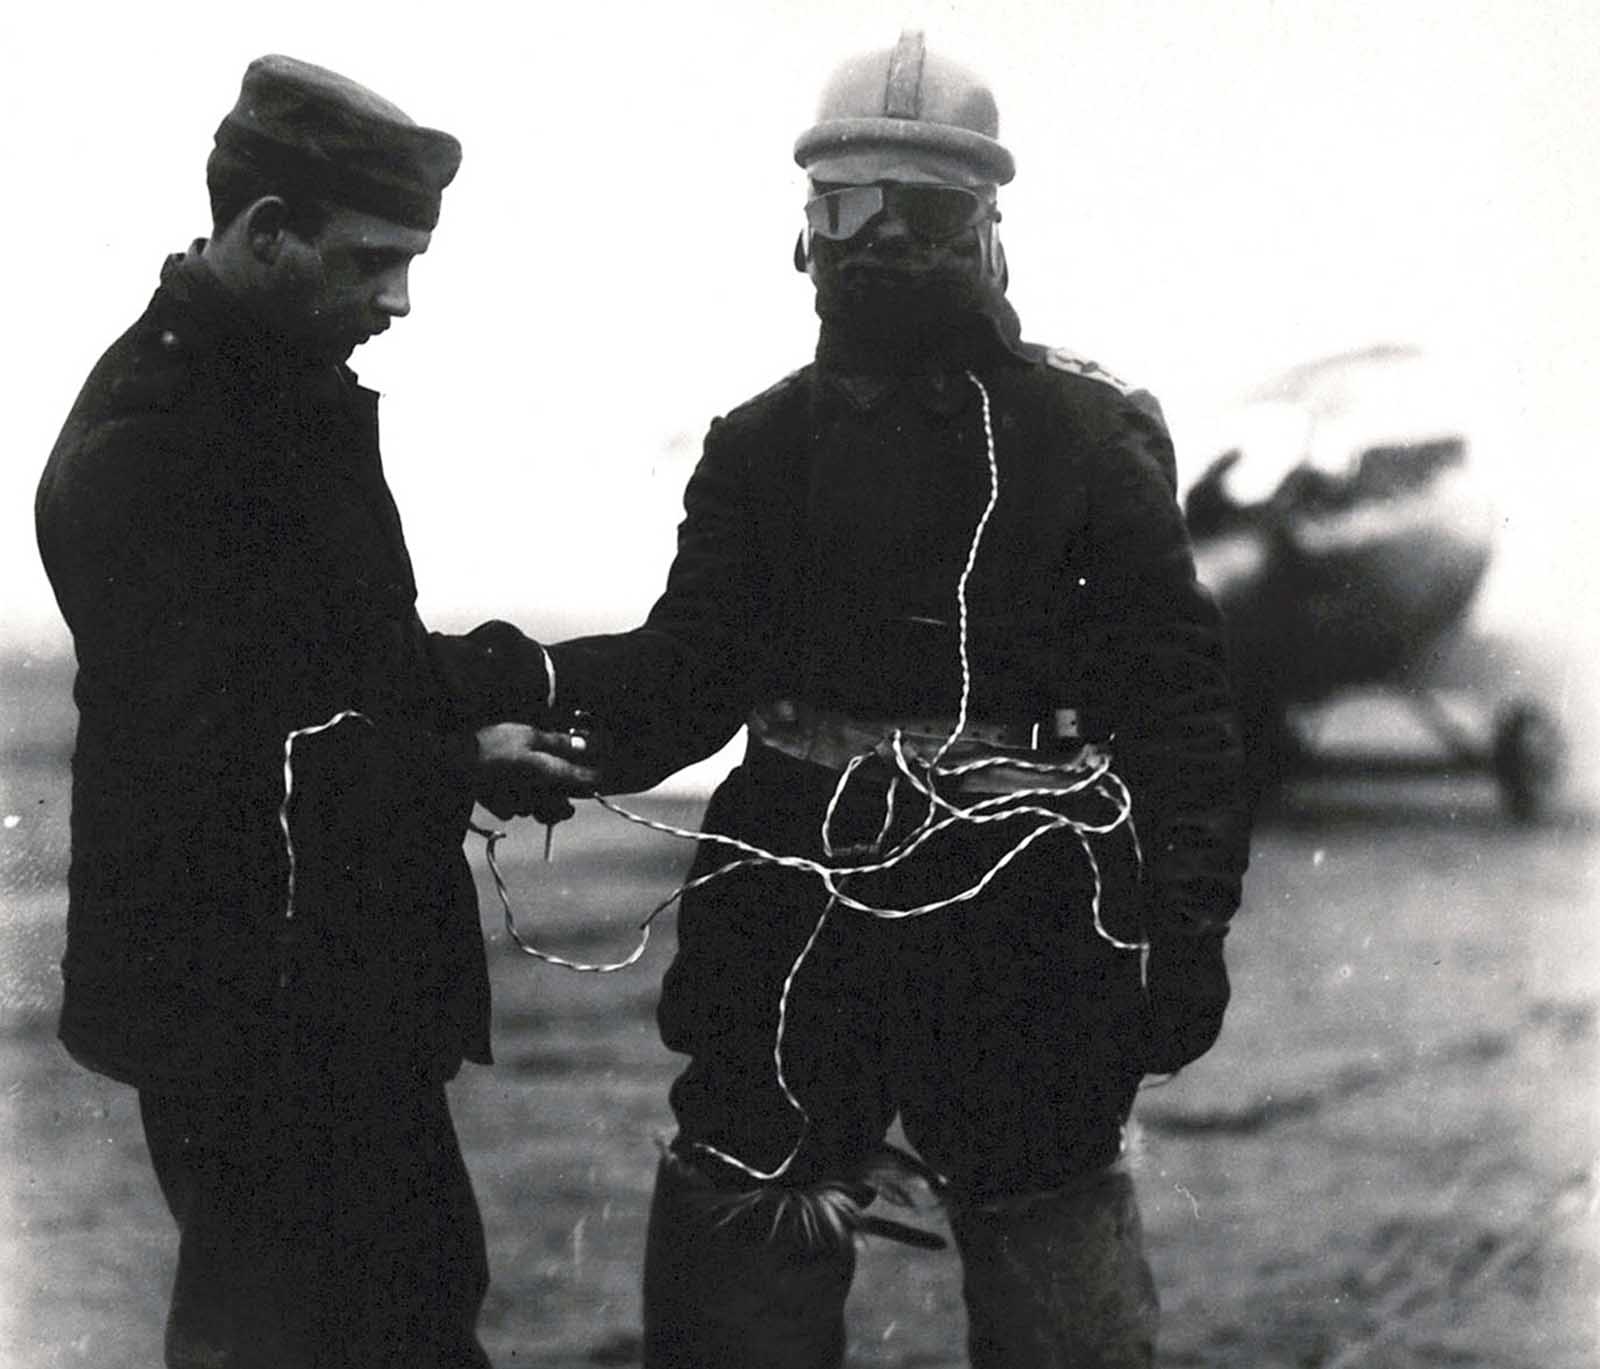 A German aviator’s suit is equipped with electrically heated face mask, vest, and fur boots. Open cockpit flight meant pilots had to endure sub-freezing conditions.